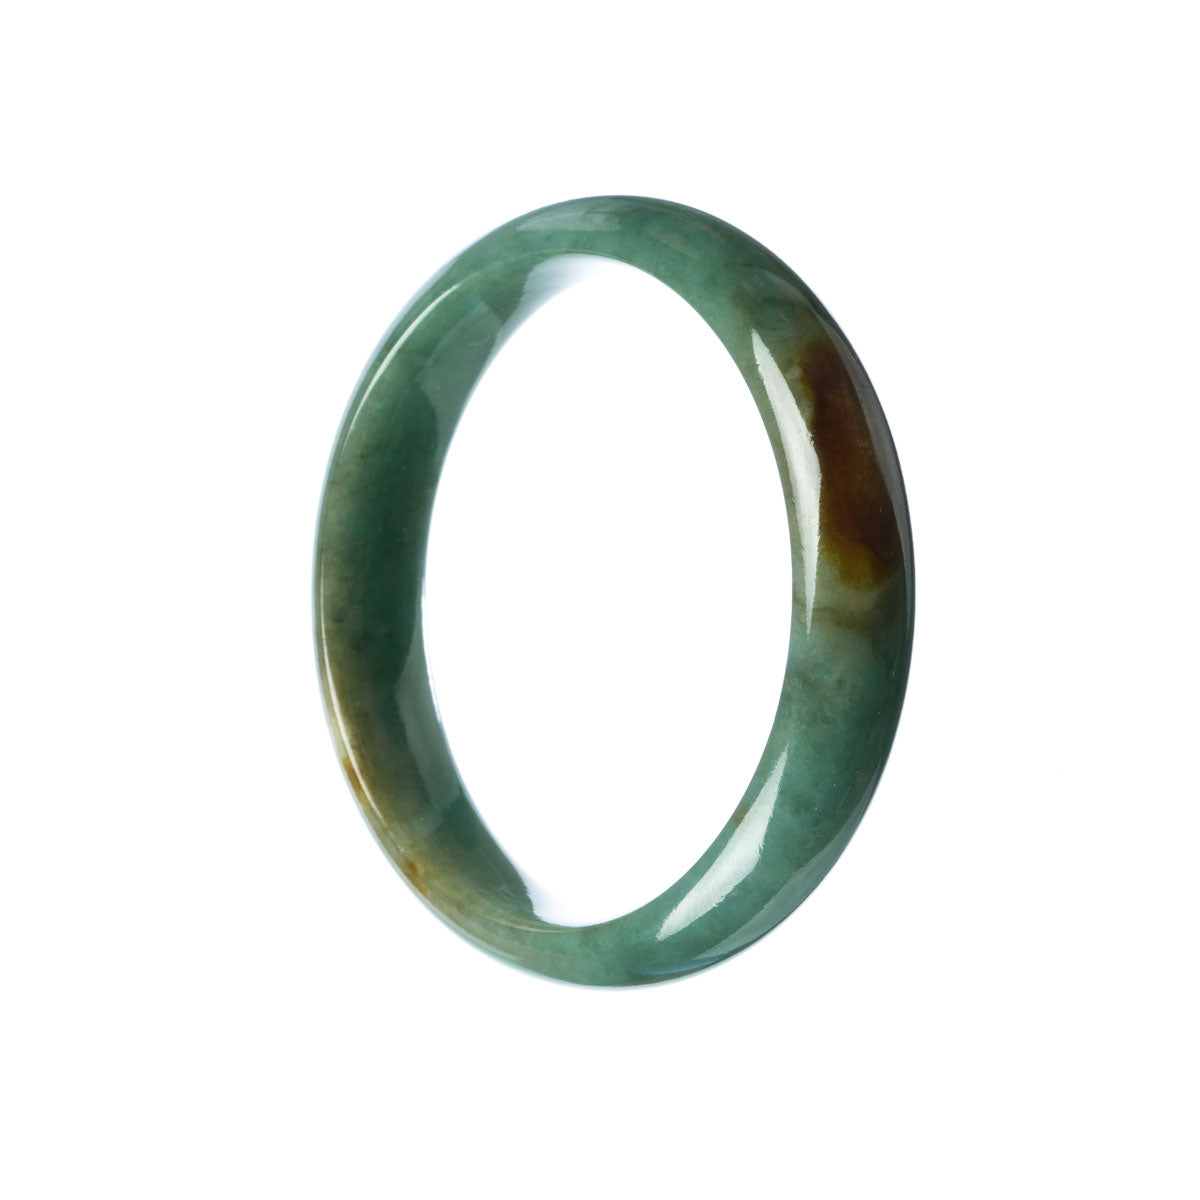 A half-moon shaped green jade bangle bracelet with a traditional design. The bracelet is made of genuine untreated jade and has a diameter of 57mm. It is a beautiful and timeless piece of jewelry.